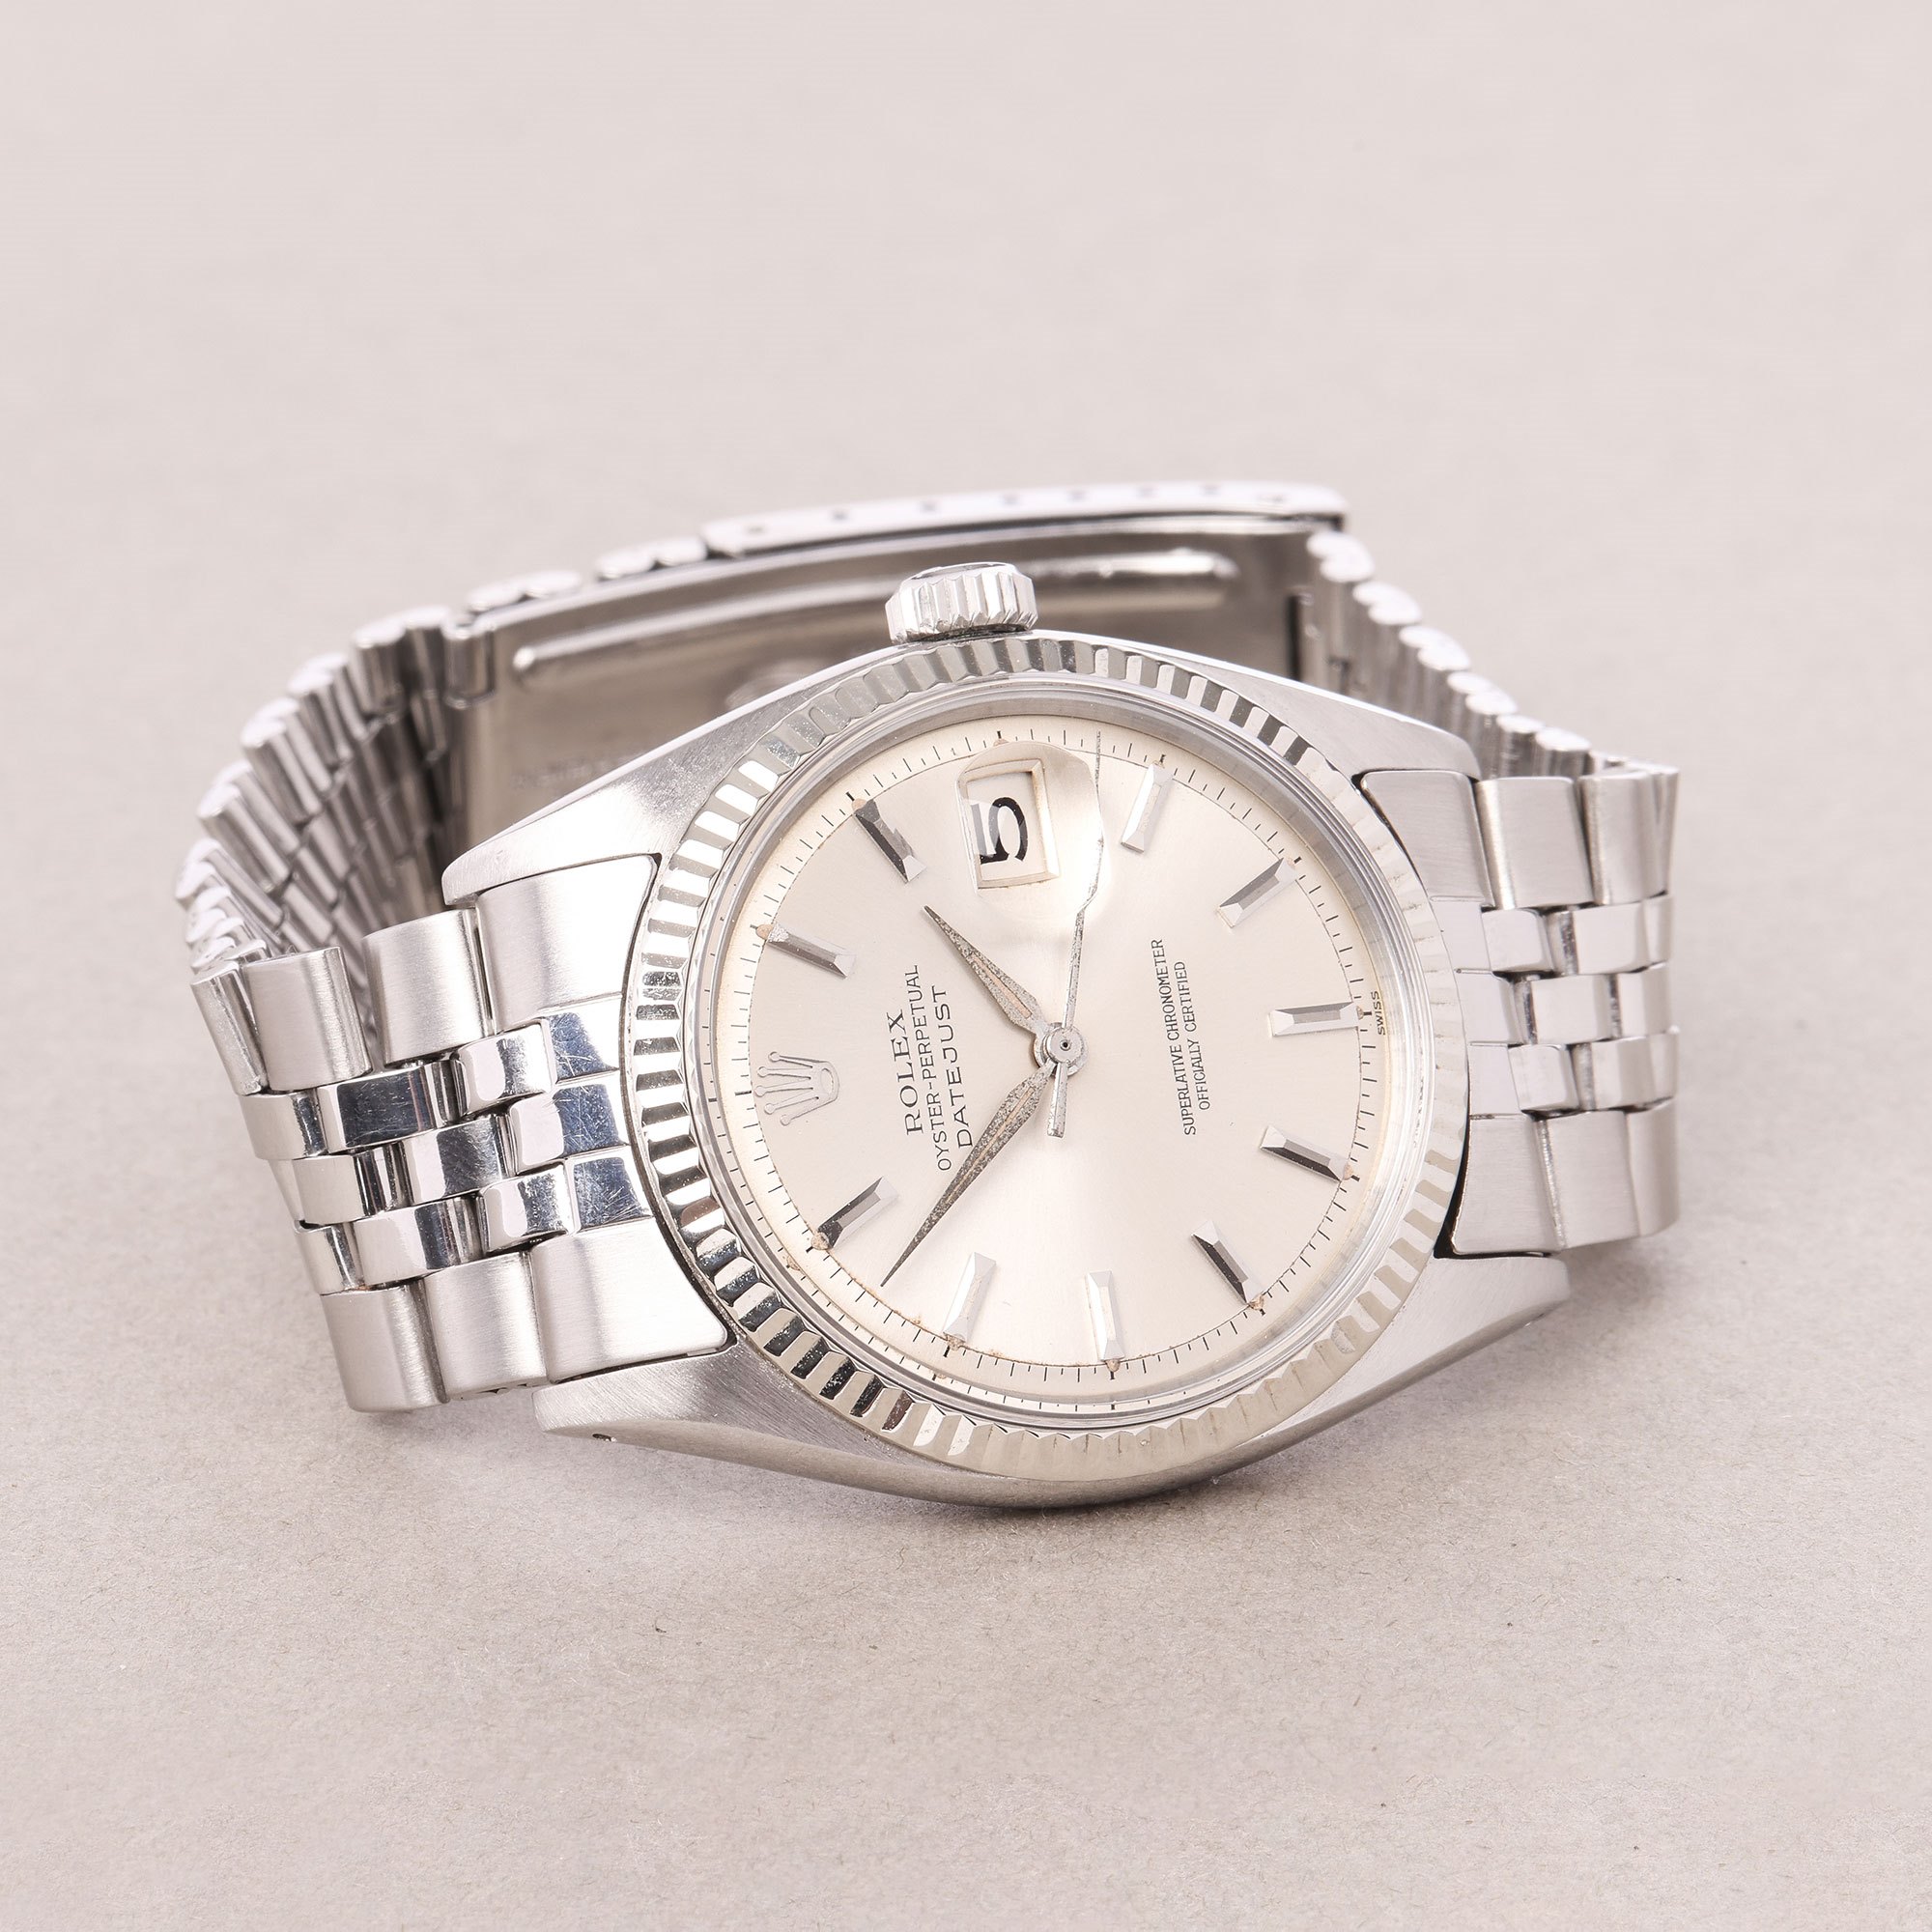 Rolex Datejust 36 Sword Hands 18K White Gold & Stainless Steel Watch 1601 - Image 8 of 10